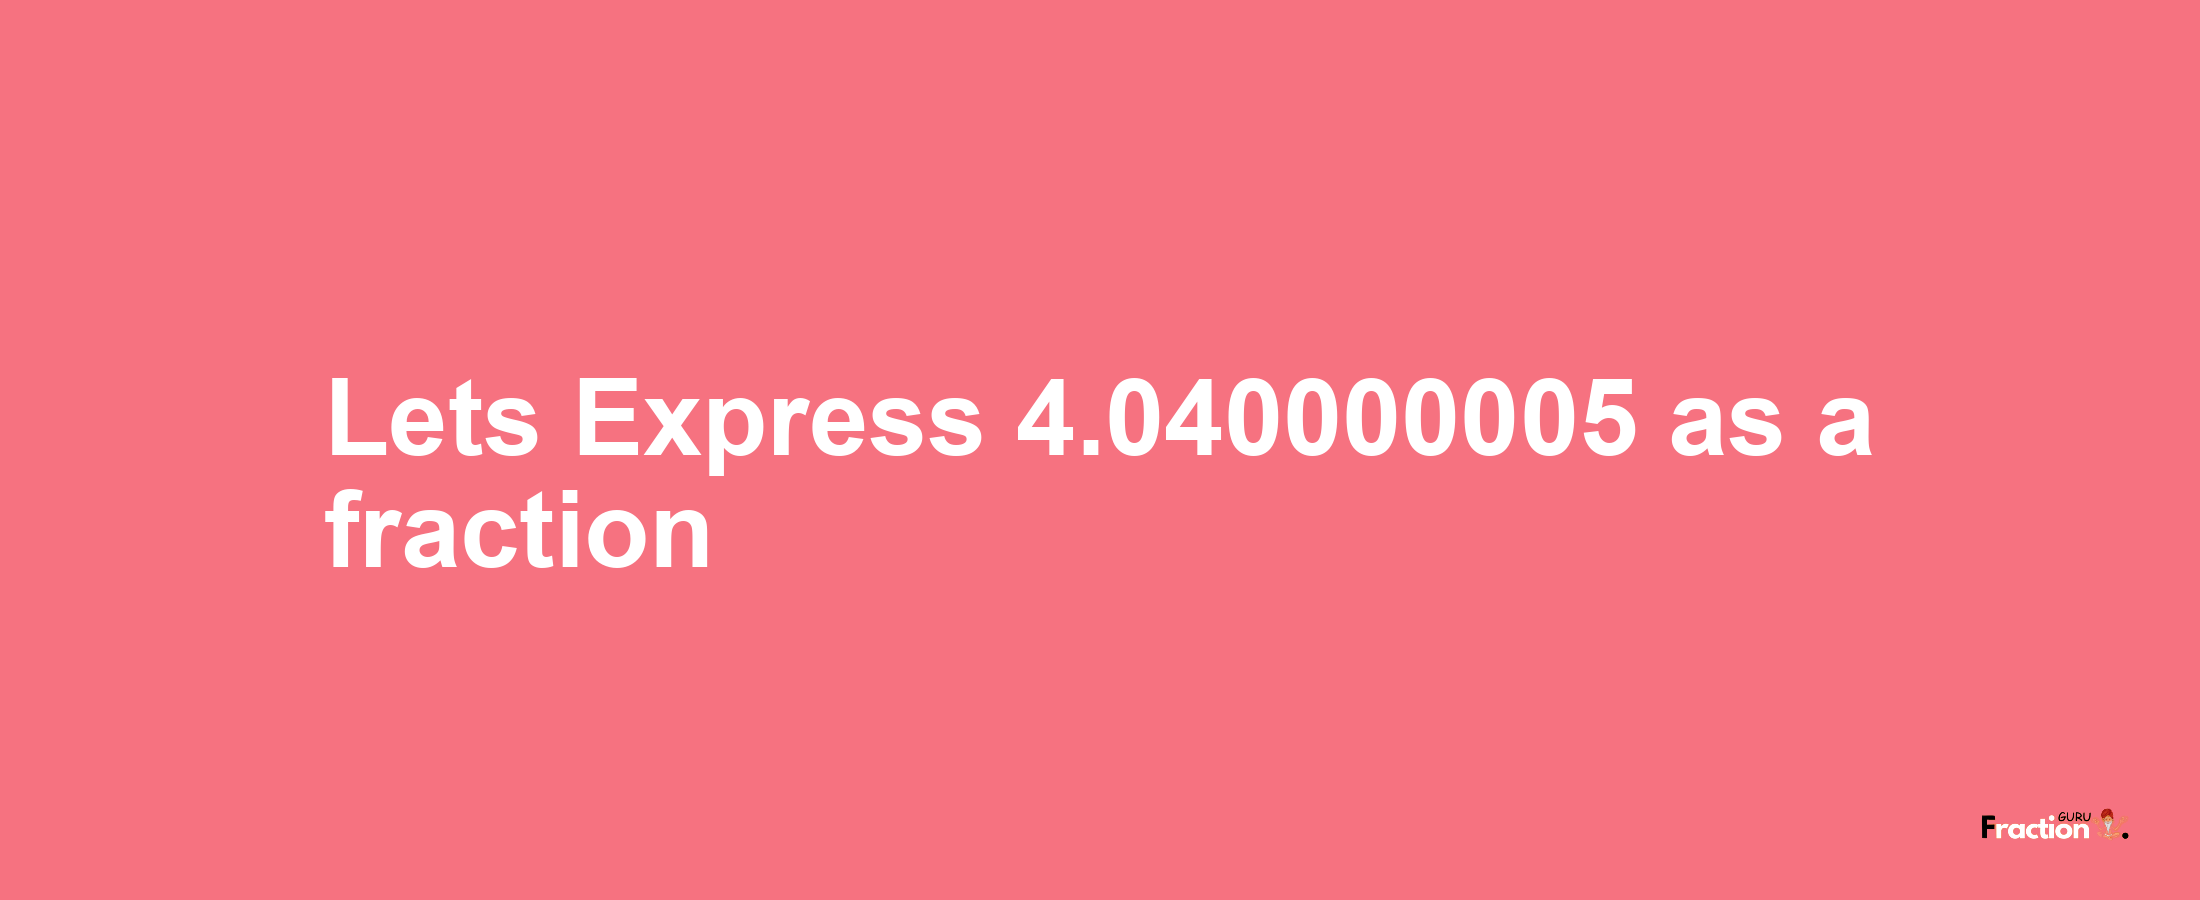 Lets Express 4.040000005 as afraction